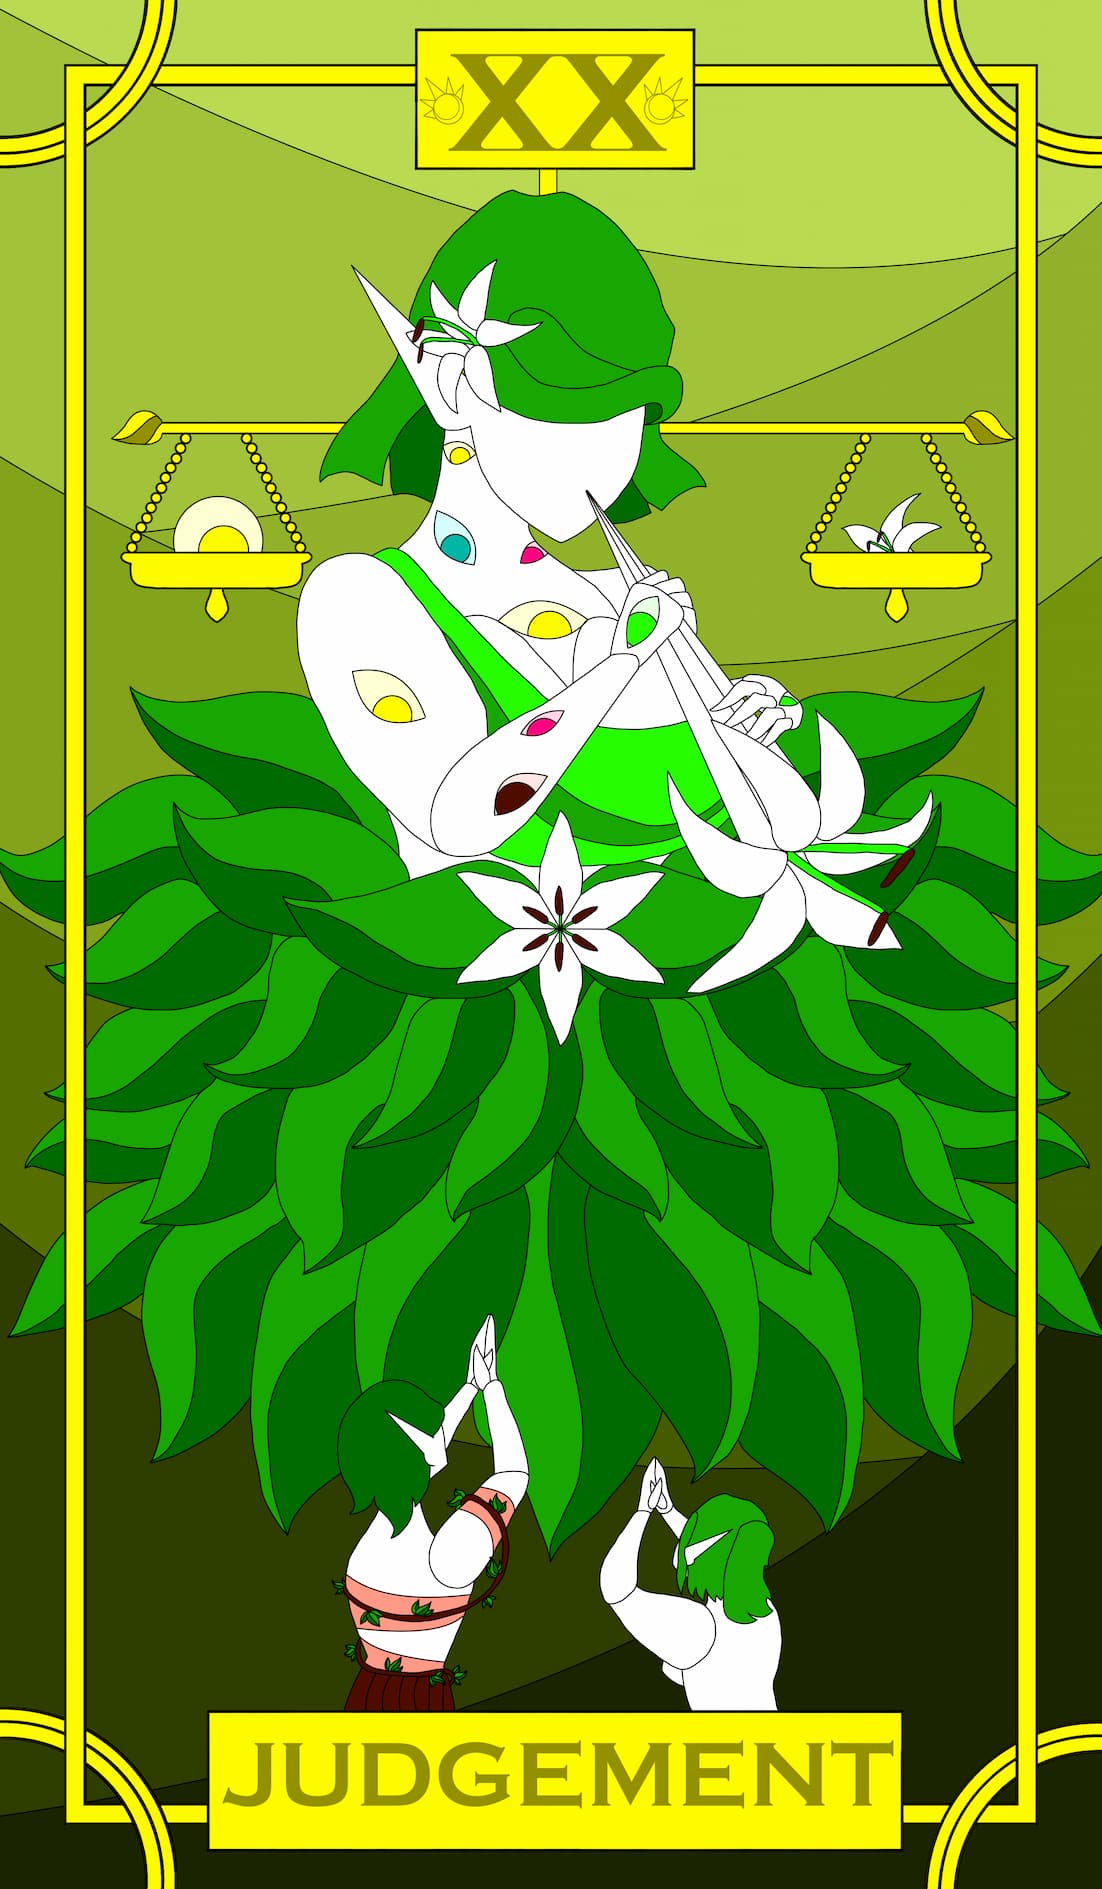 A God of a thousand eyes using a white lily as a trumpet. Her two avatars reach out to her.